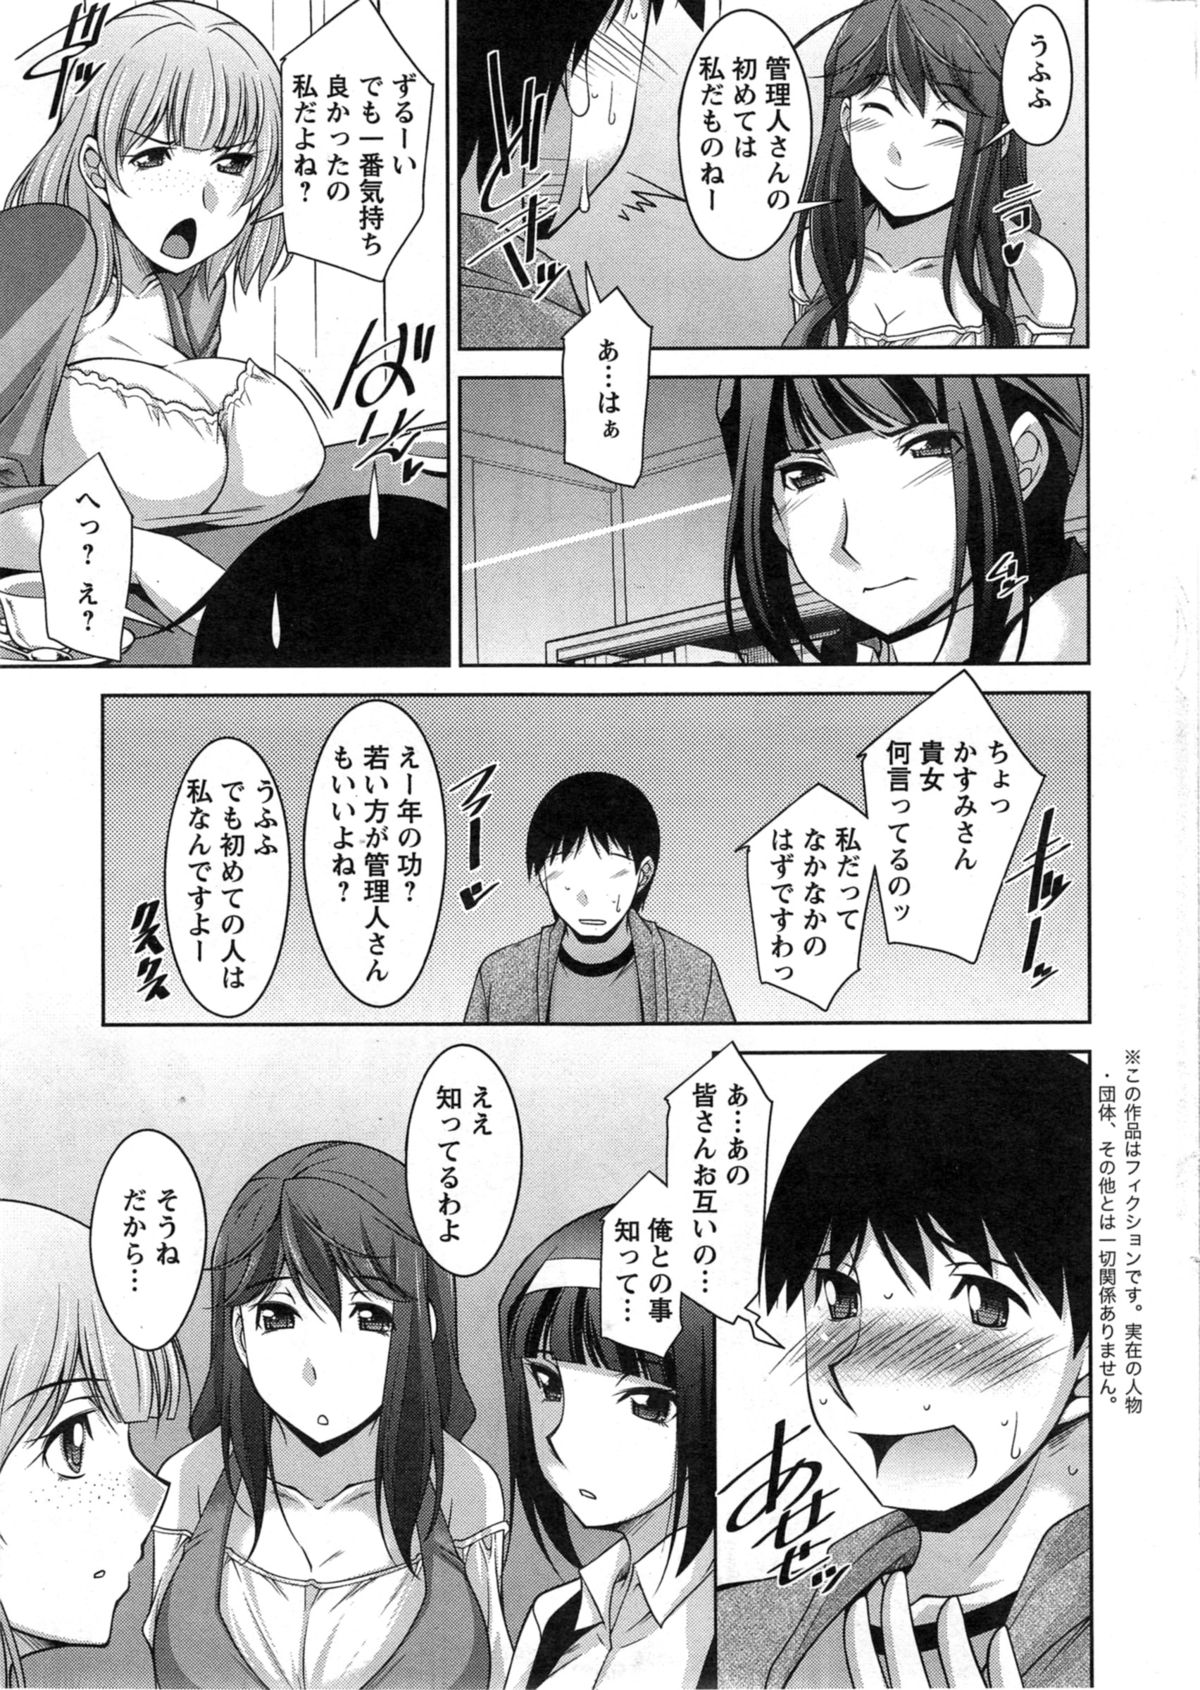 Action Pizazz DX 2014-05 page 9 full